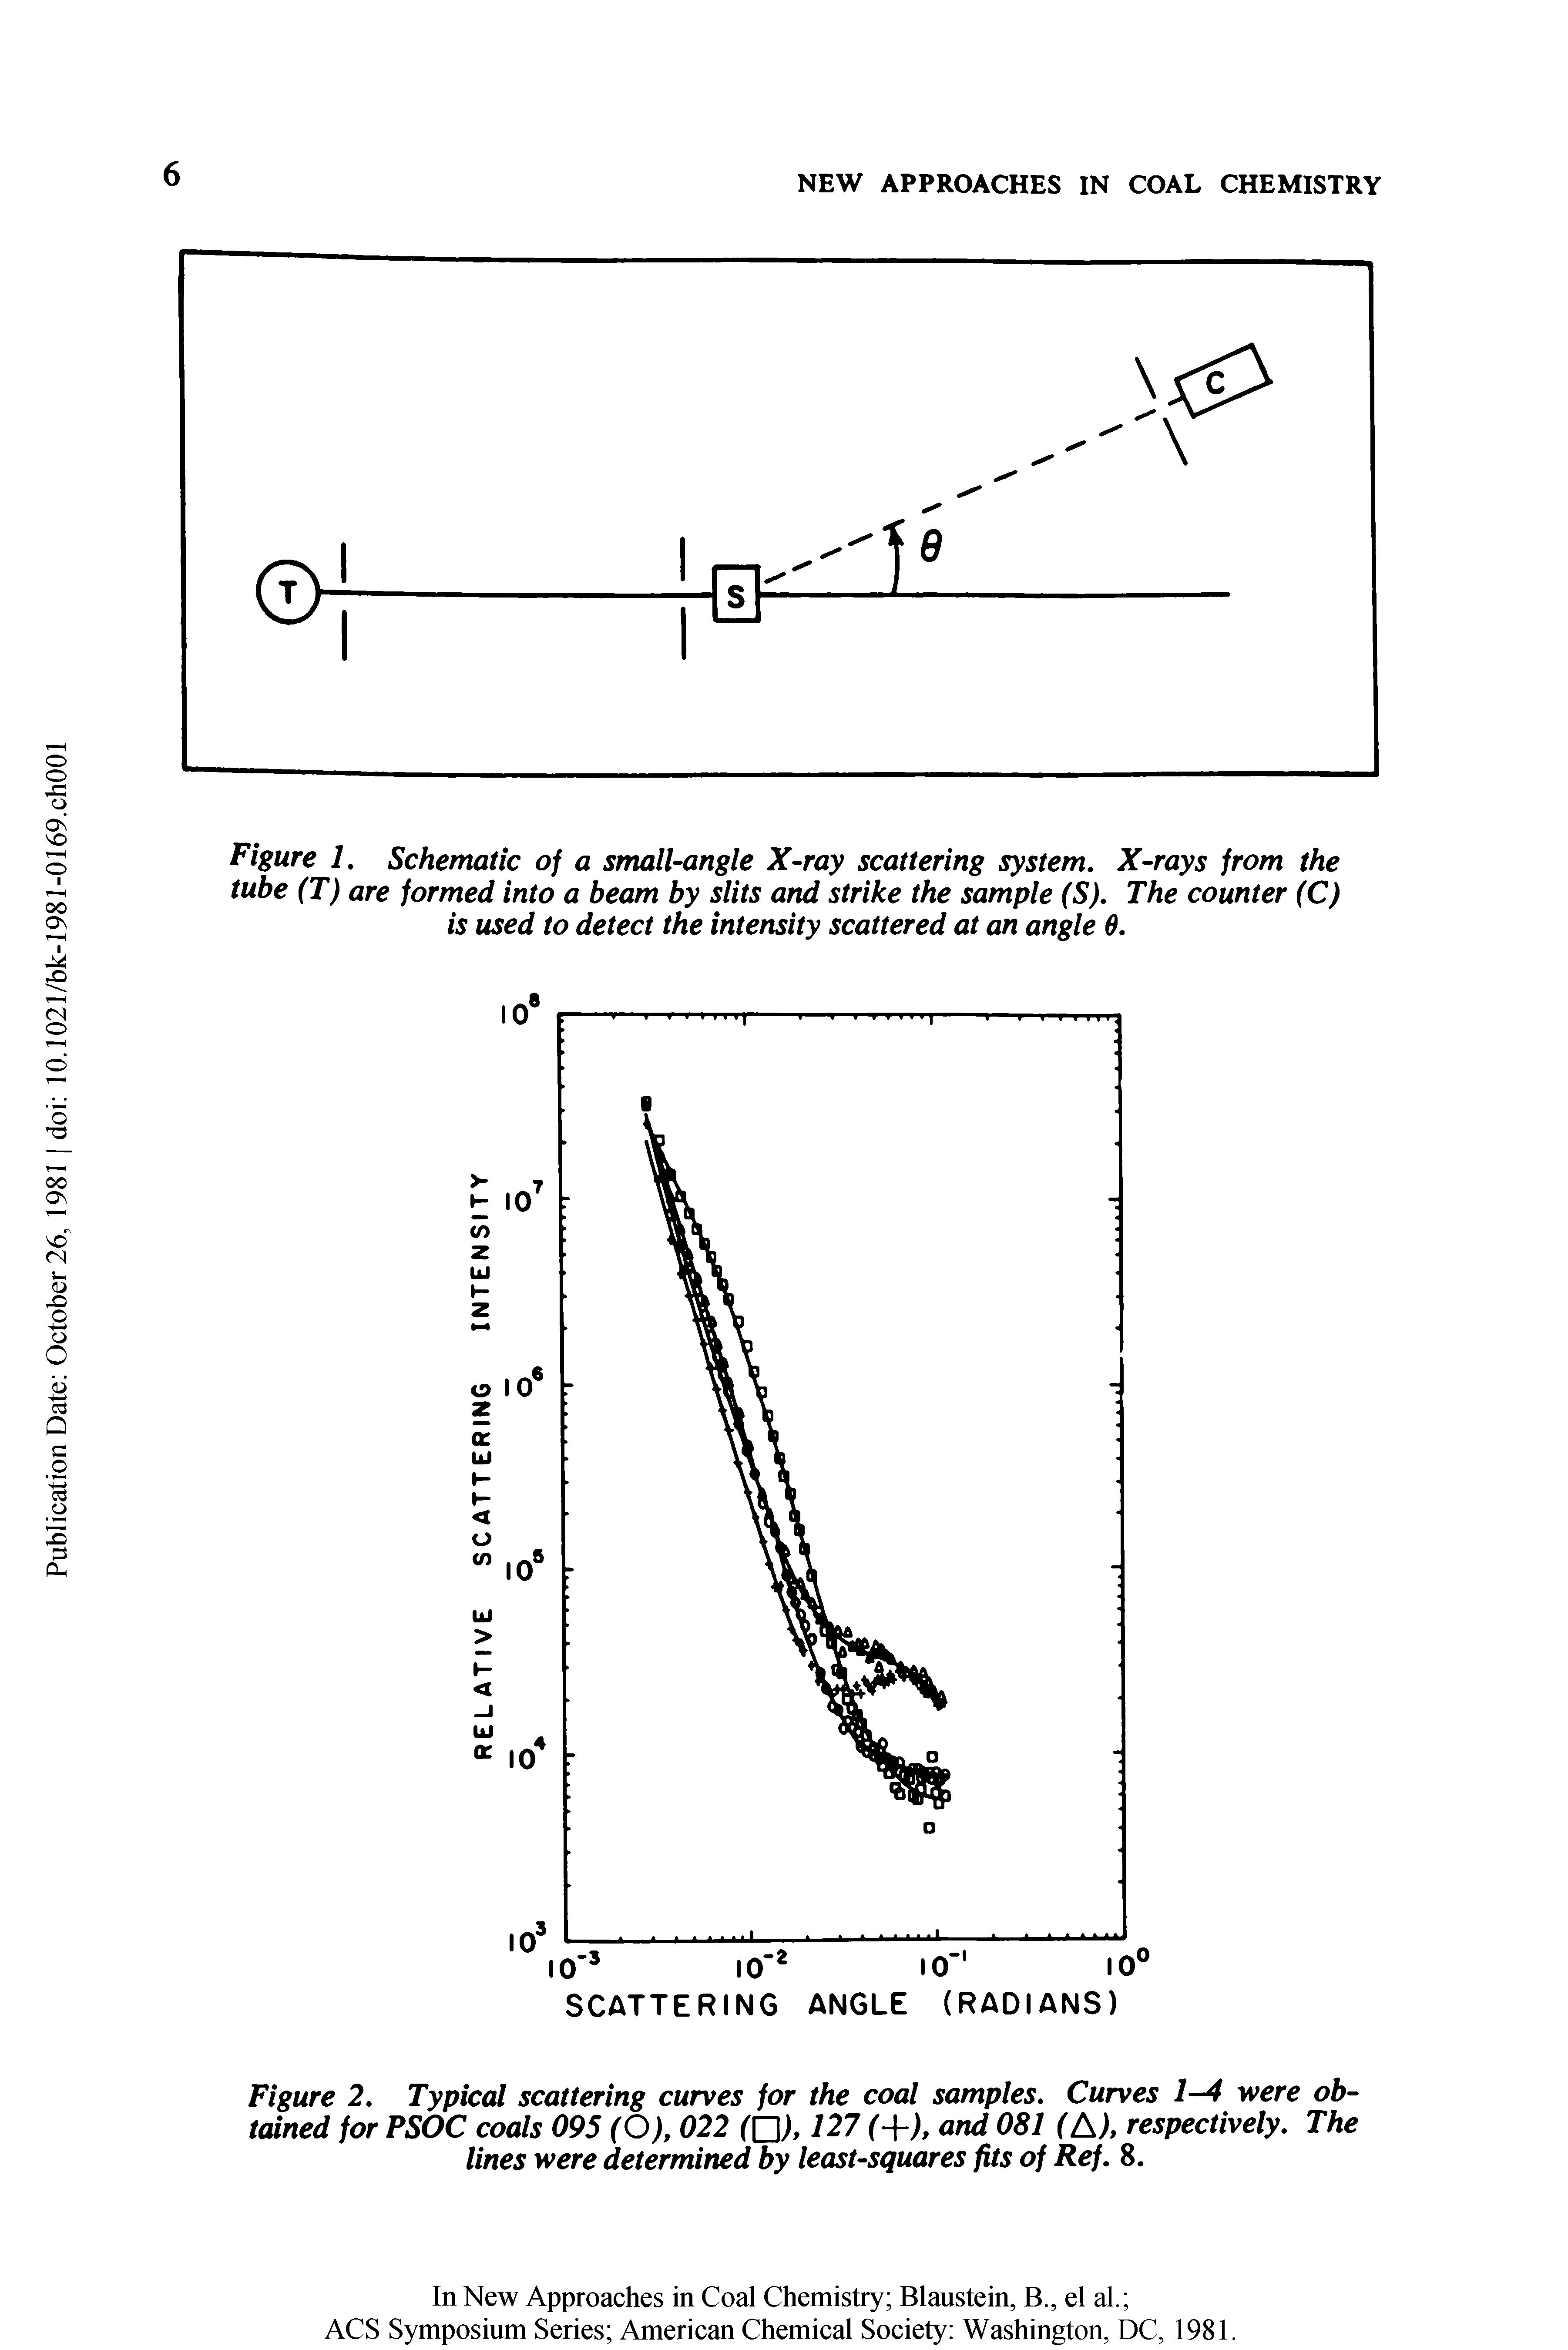 Figure 2. Typical scattering curves for the coal samples. Curves 1-4 were obtained for PSOC coals 095 (O), 022 0> 127 (+), and 081 (Ah respectively. The lines were determined by least-squares fits of Ref. 8.